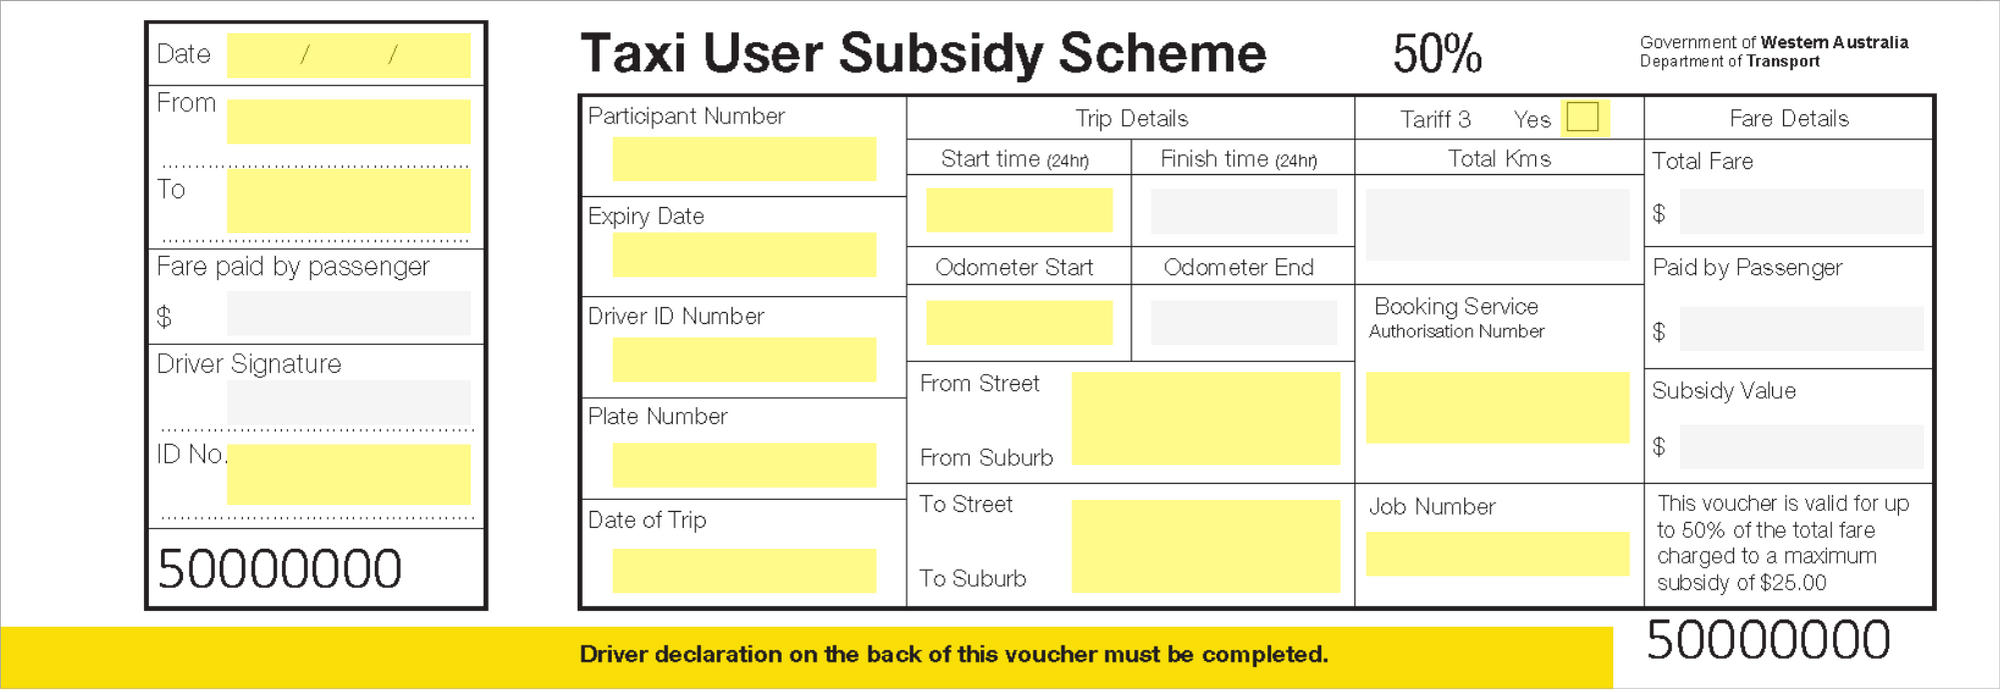 TUSS voucher before trip example